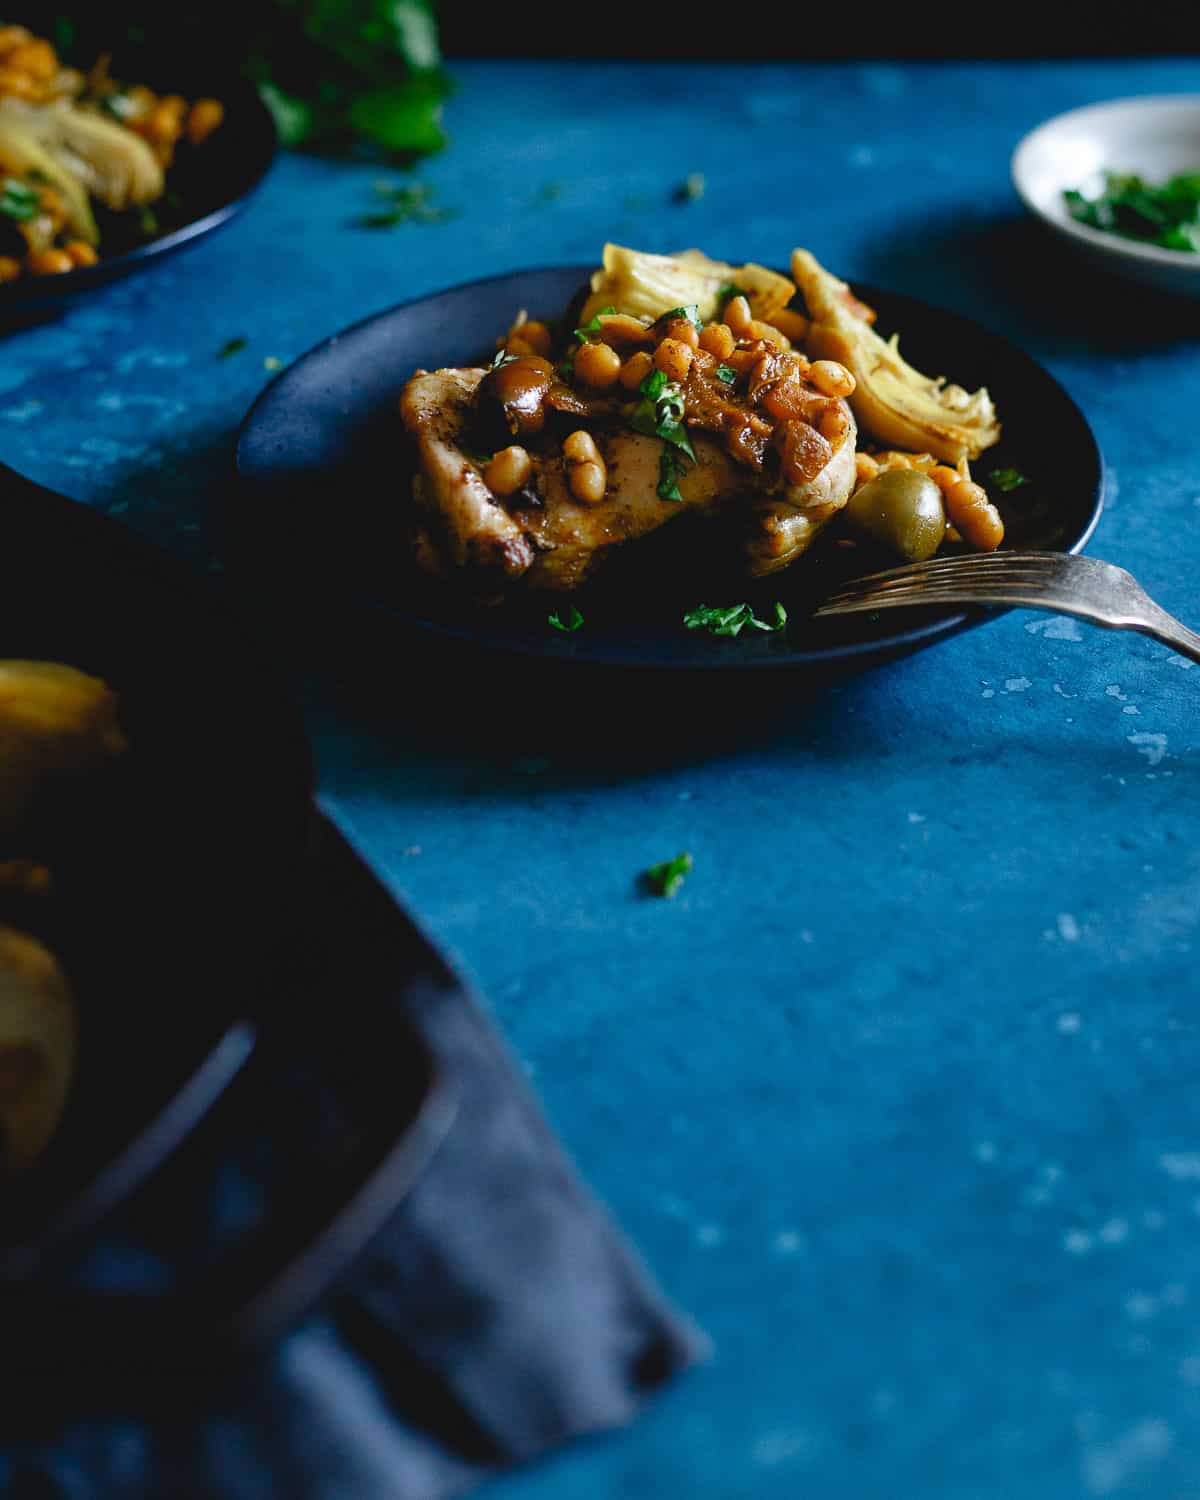 Looking for a super simple weeknight meal that doesn't skimp on flavor? This chicken artichoke and olive skillet is calling your name!